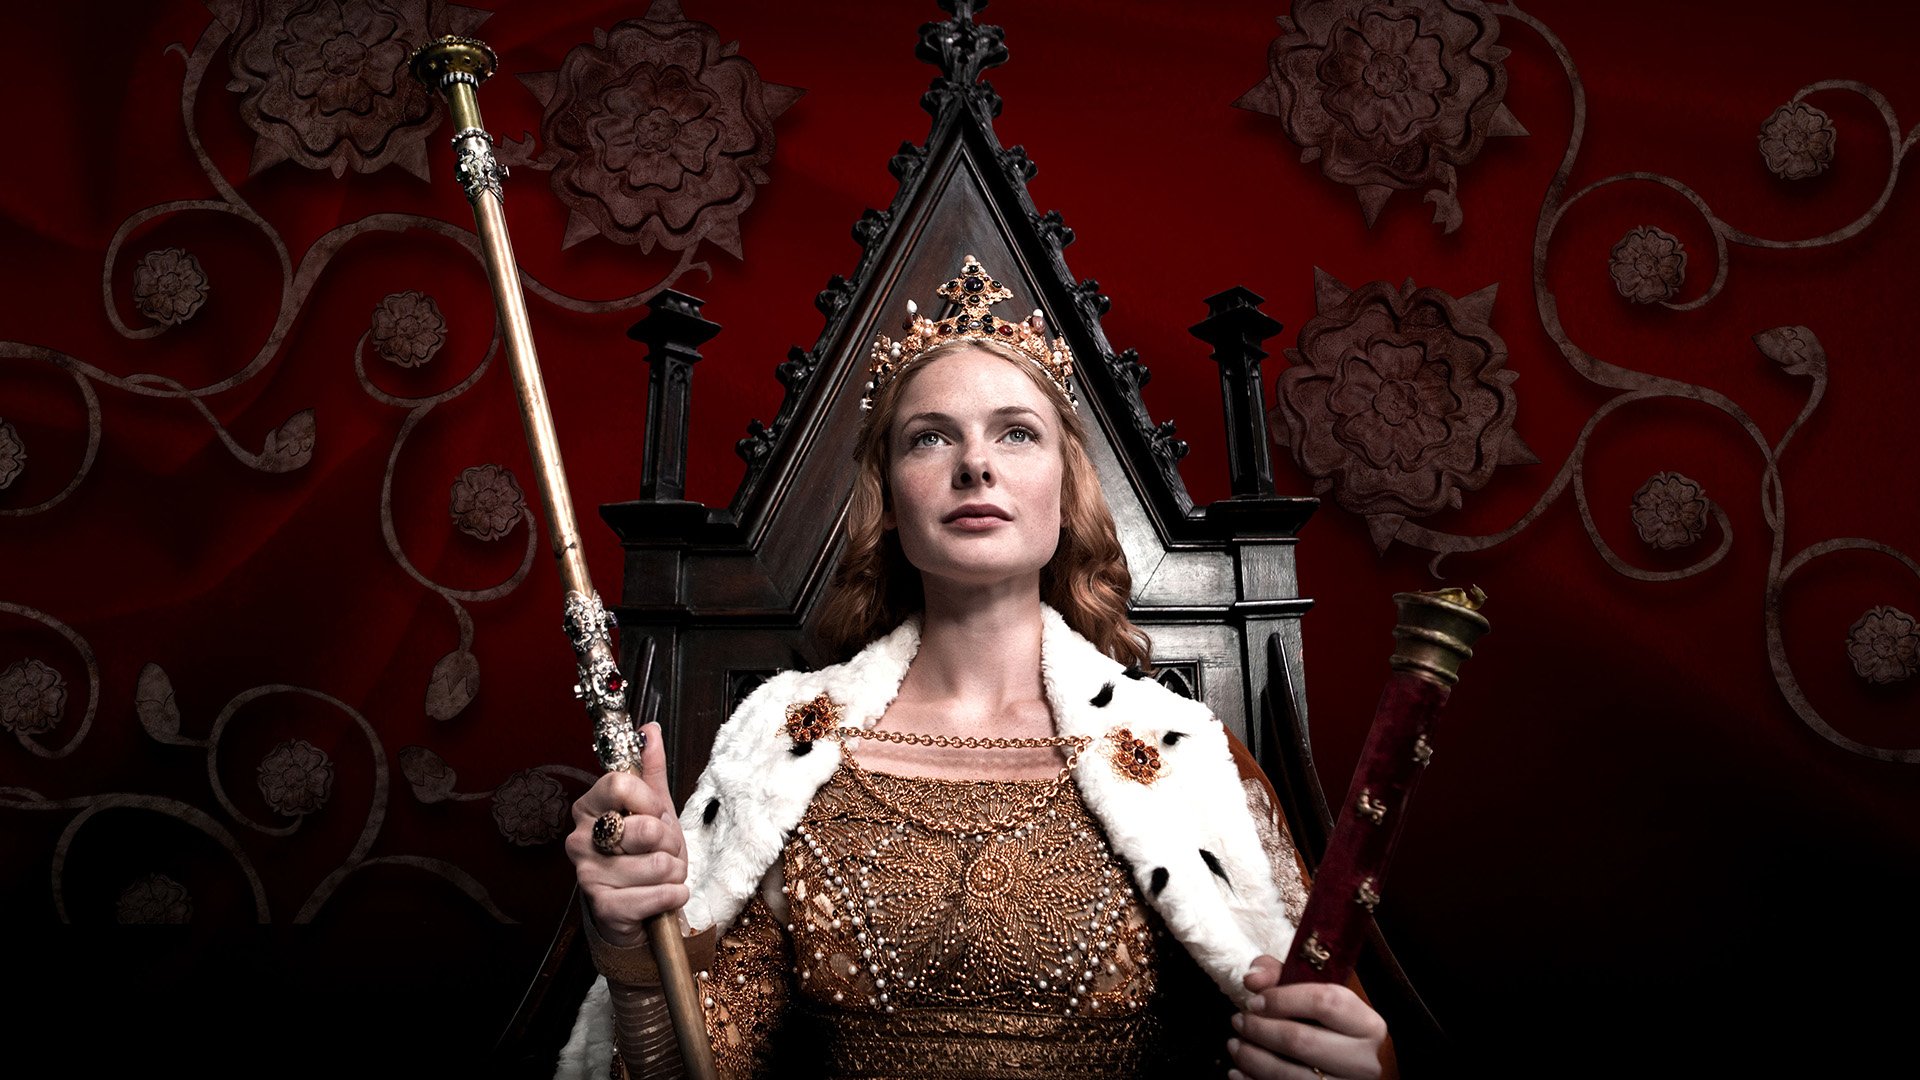 The White Queen Wallpapers